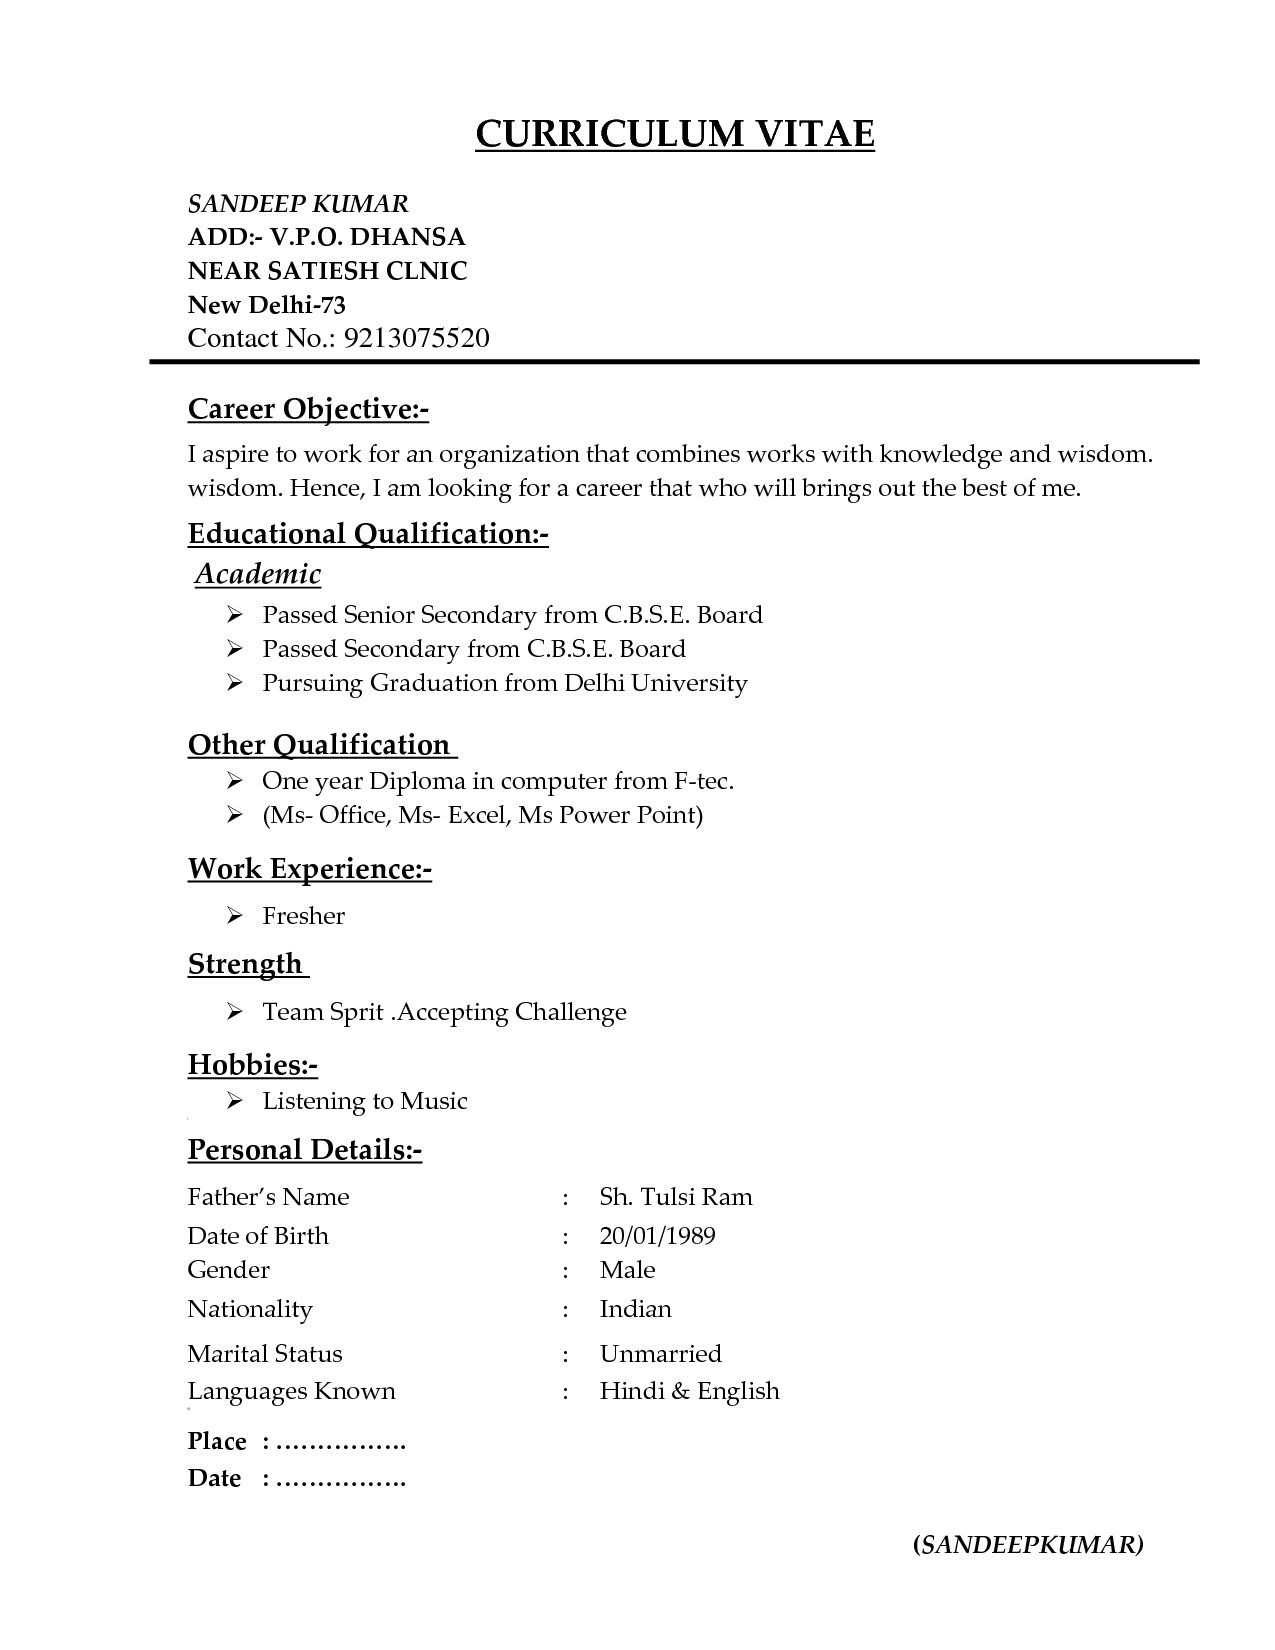 Sample Resume for All Types Of Jobs Creditcards1 Creditcards1 Resources and Information